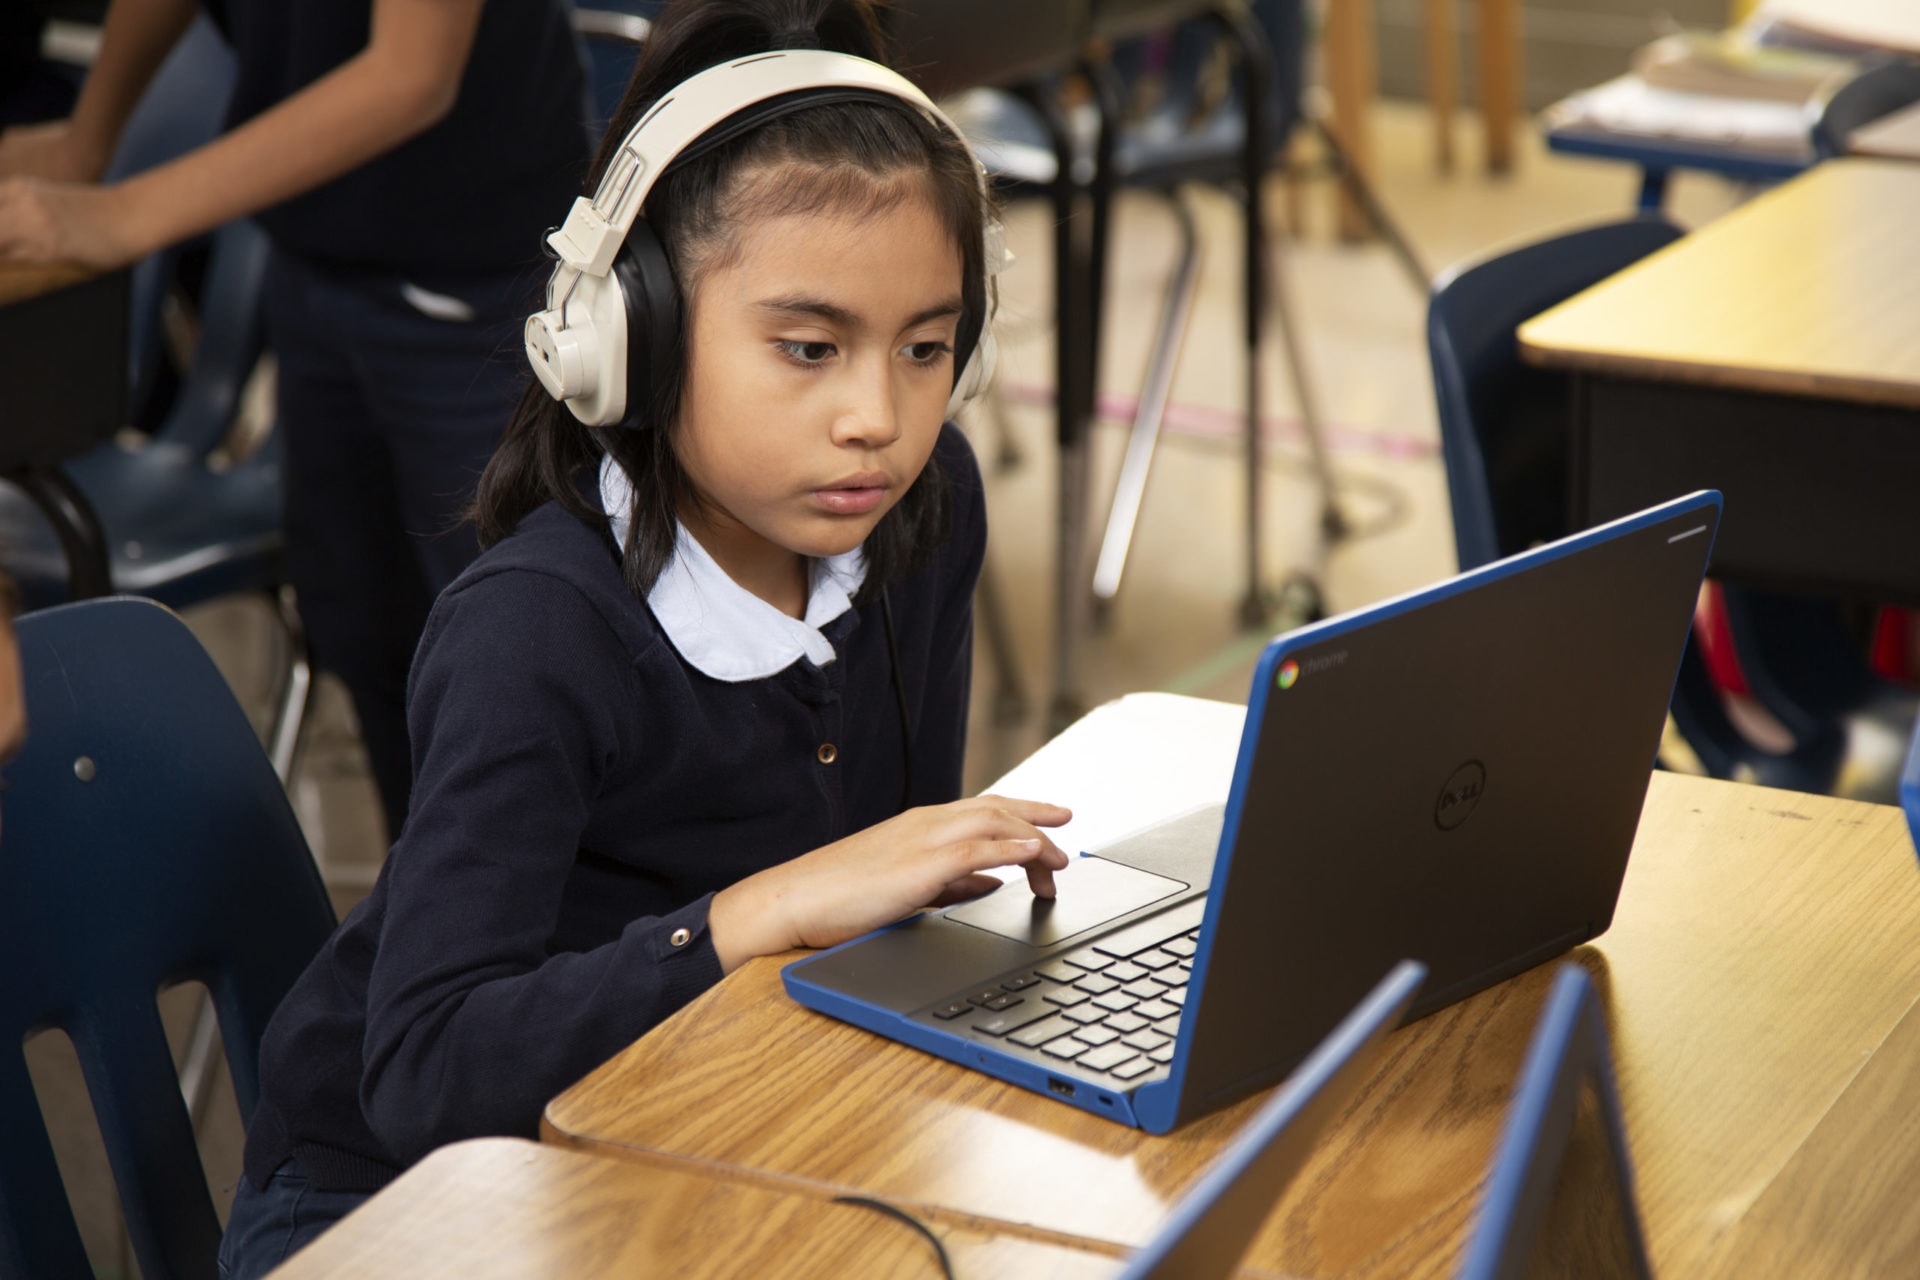 Young student in headphones using a laptop at an LAUSD classroom desk.